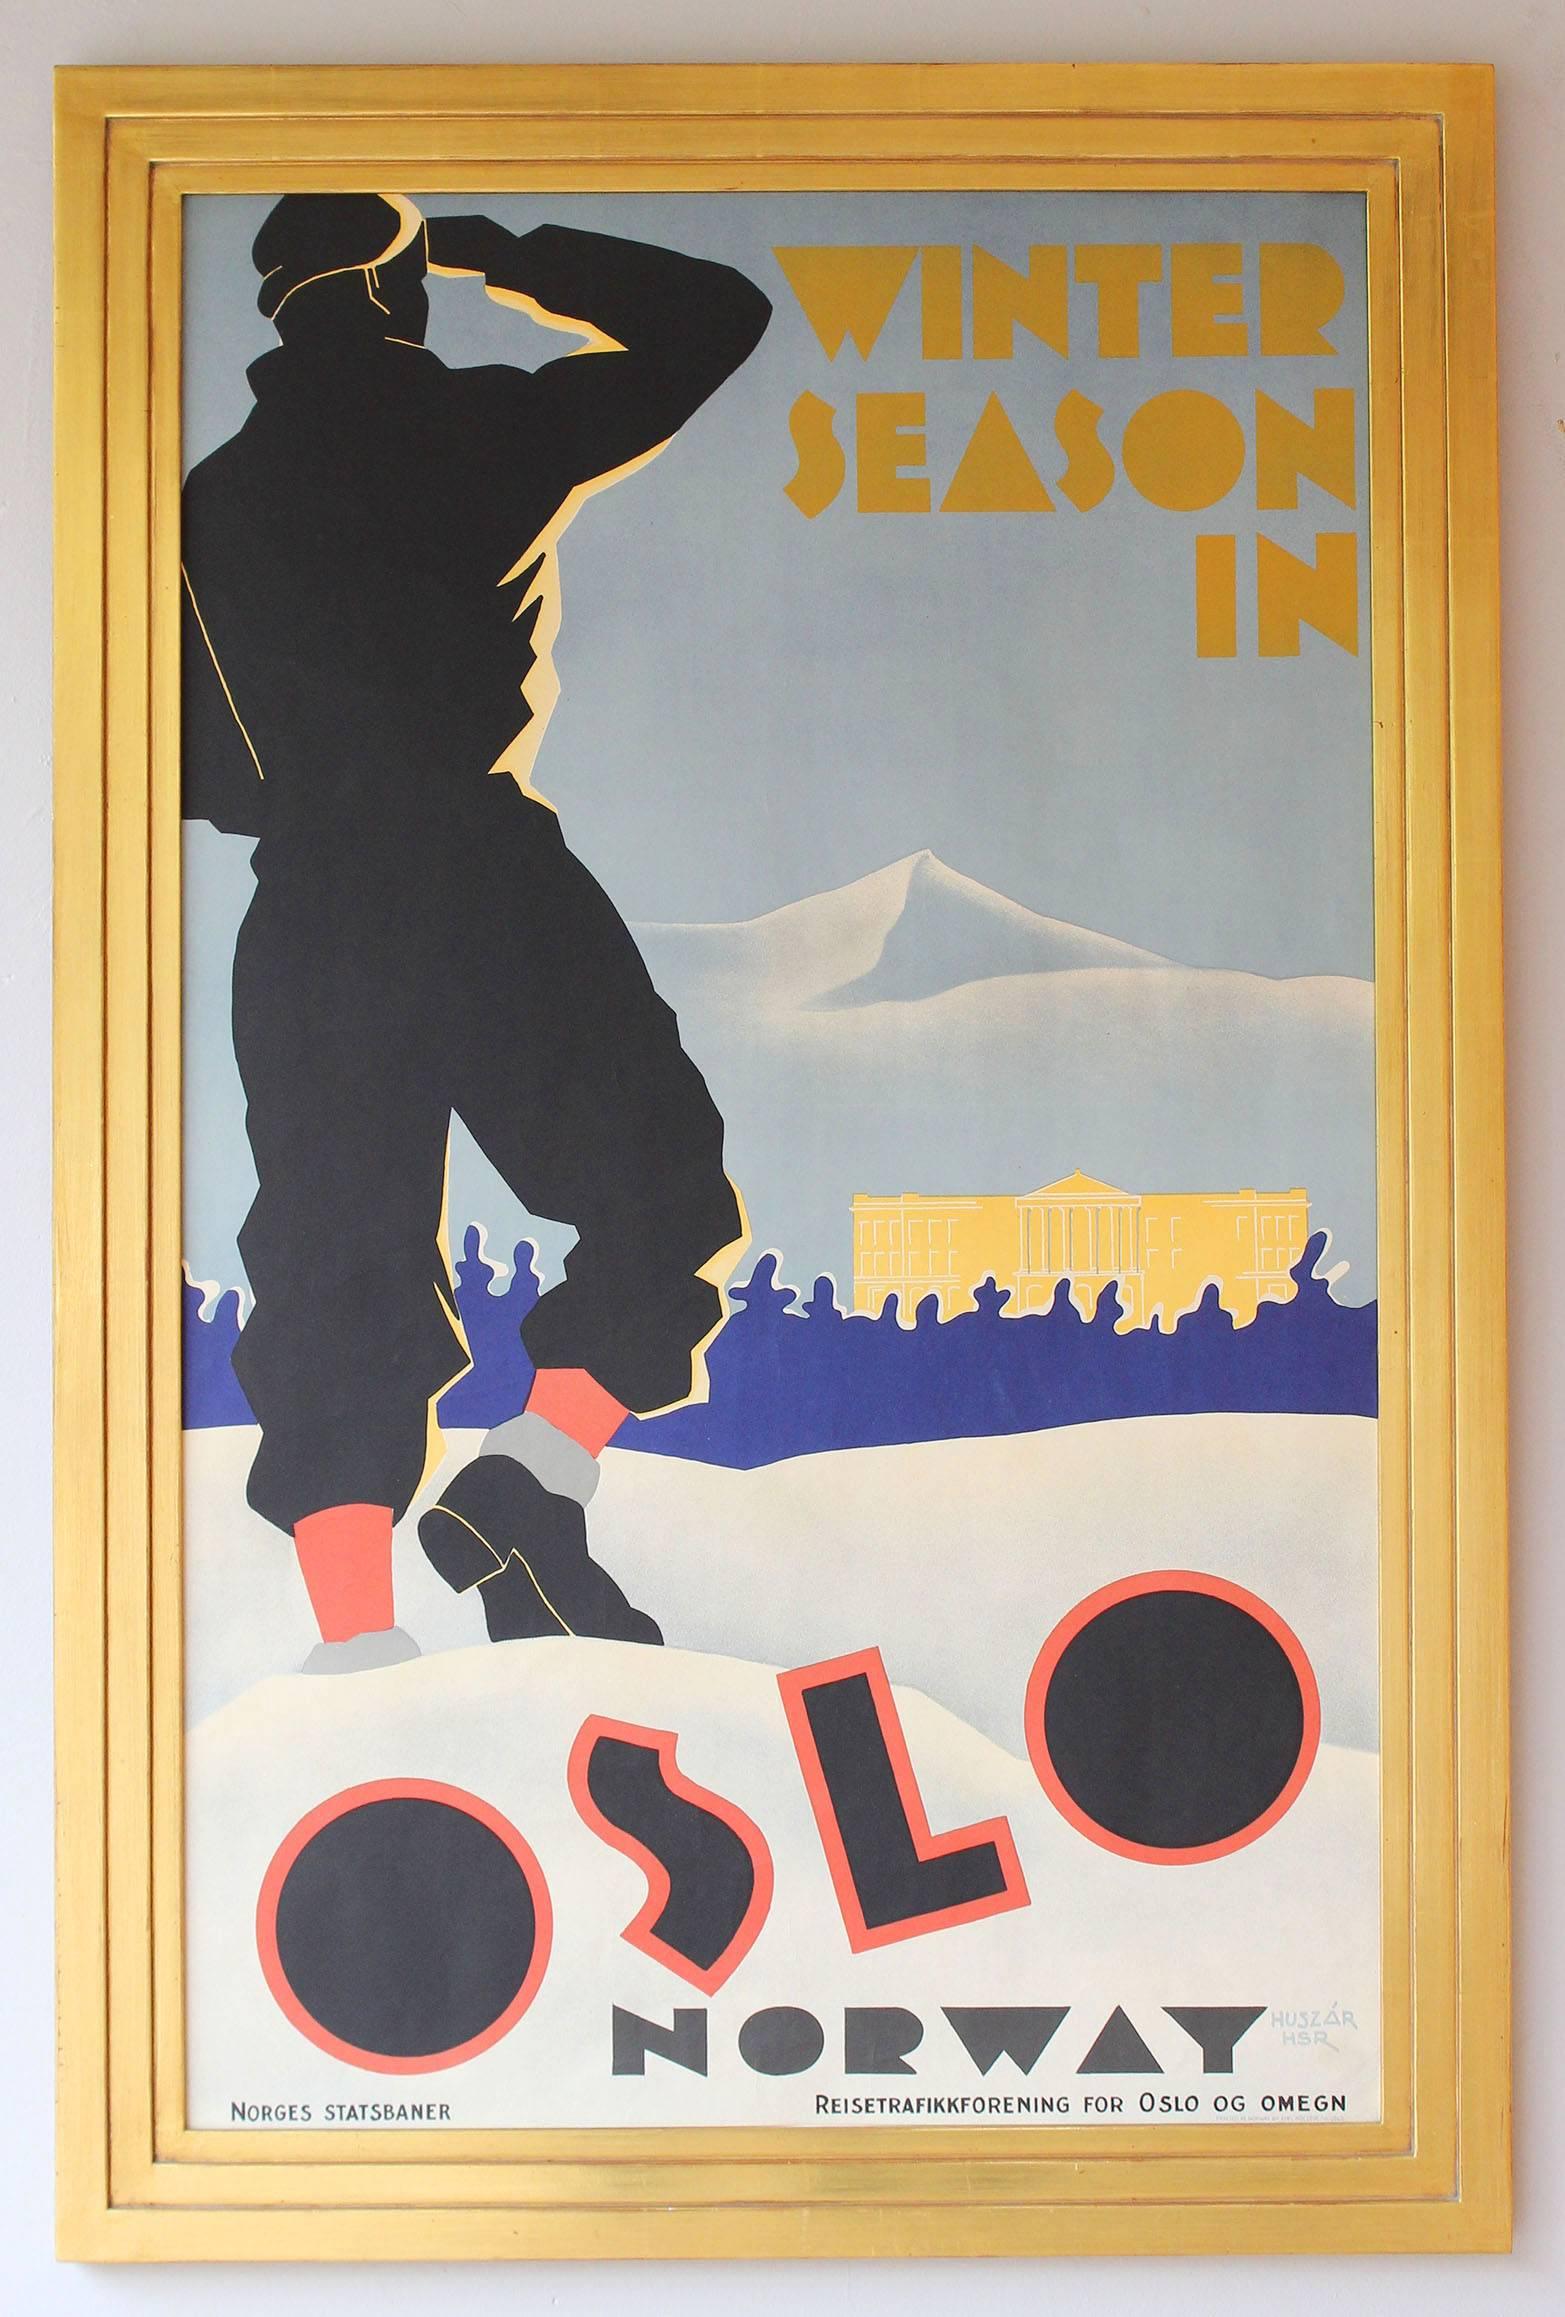 A 1930's screen printed Oslo ski poster by Huszar, in gilded wood frame.

